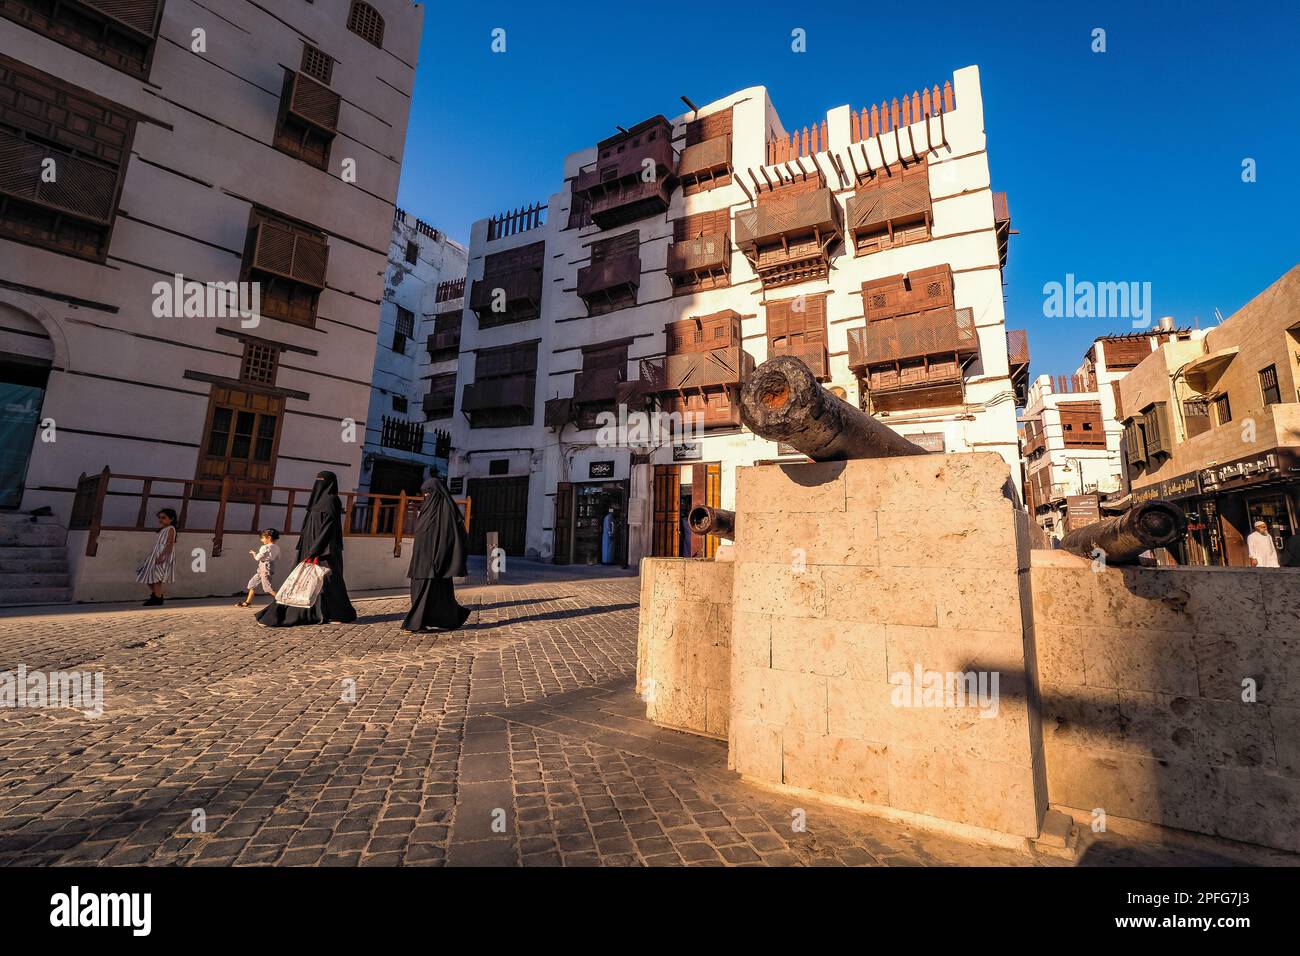 View of Arab women in abaya with children passing the cannon at Souk al Alawi Street in the historic district of Al-Balad, Jeddah, KSA, Saudi Arabia Stock Photo